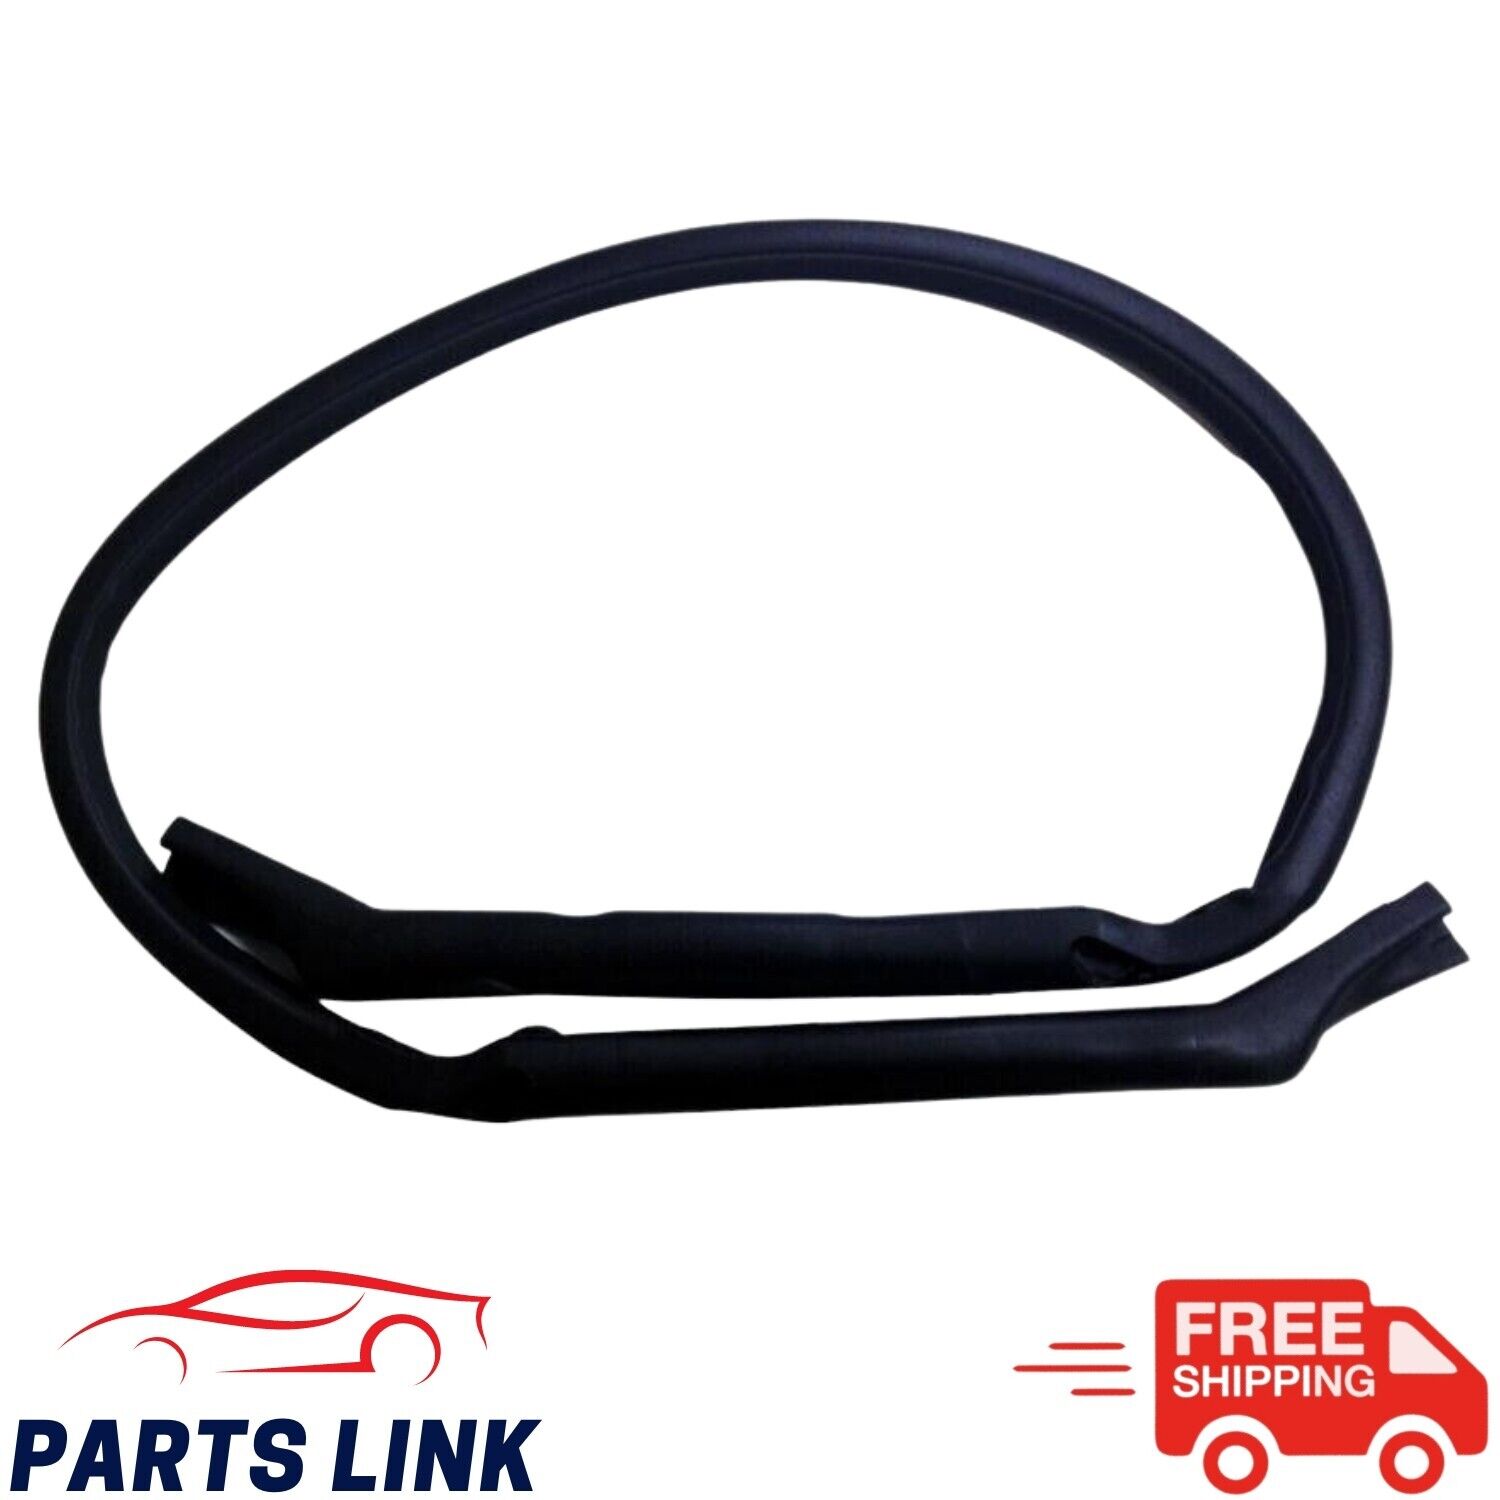 New Rear Roof Weatherstrip Seal Gasket For 1997-2004 Chevrolet Corvette 10329158